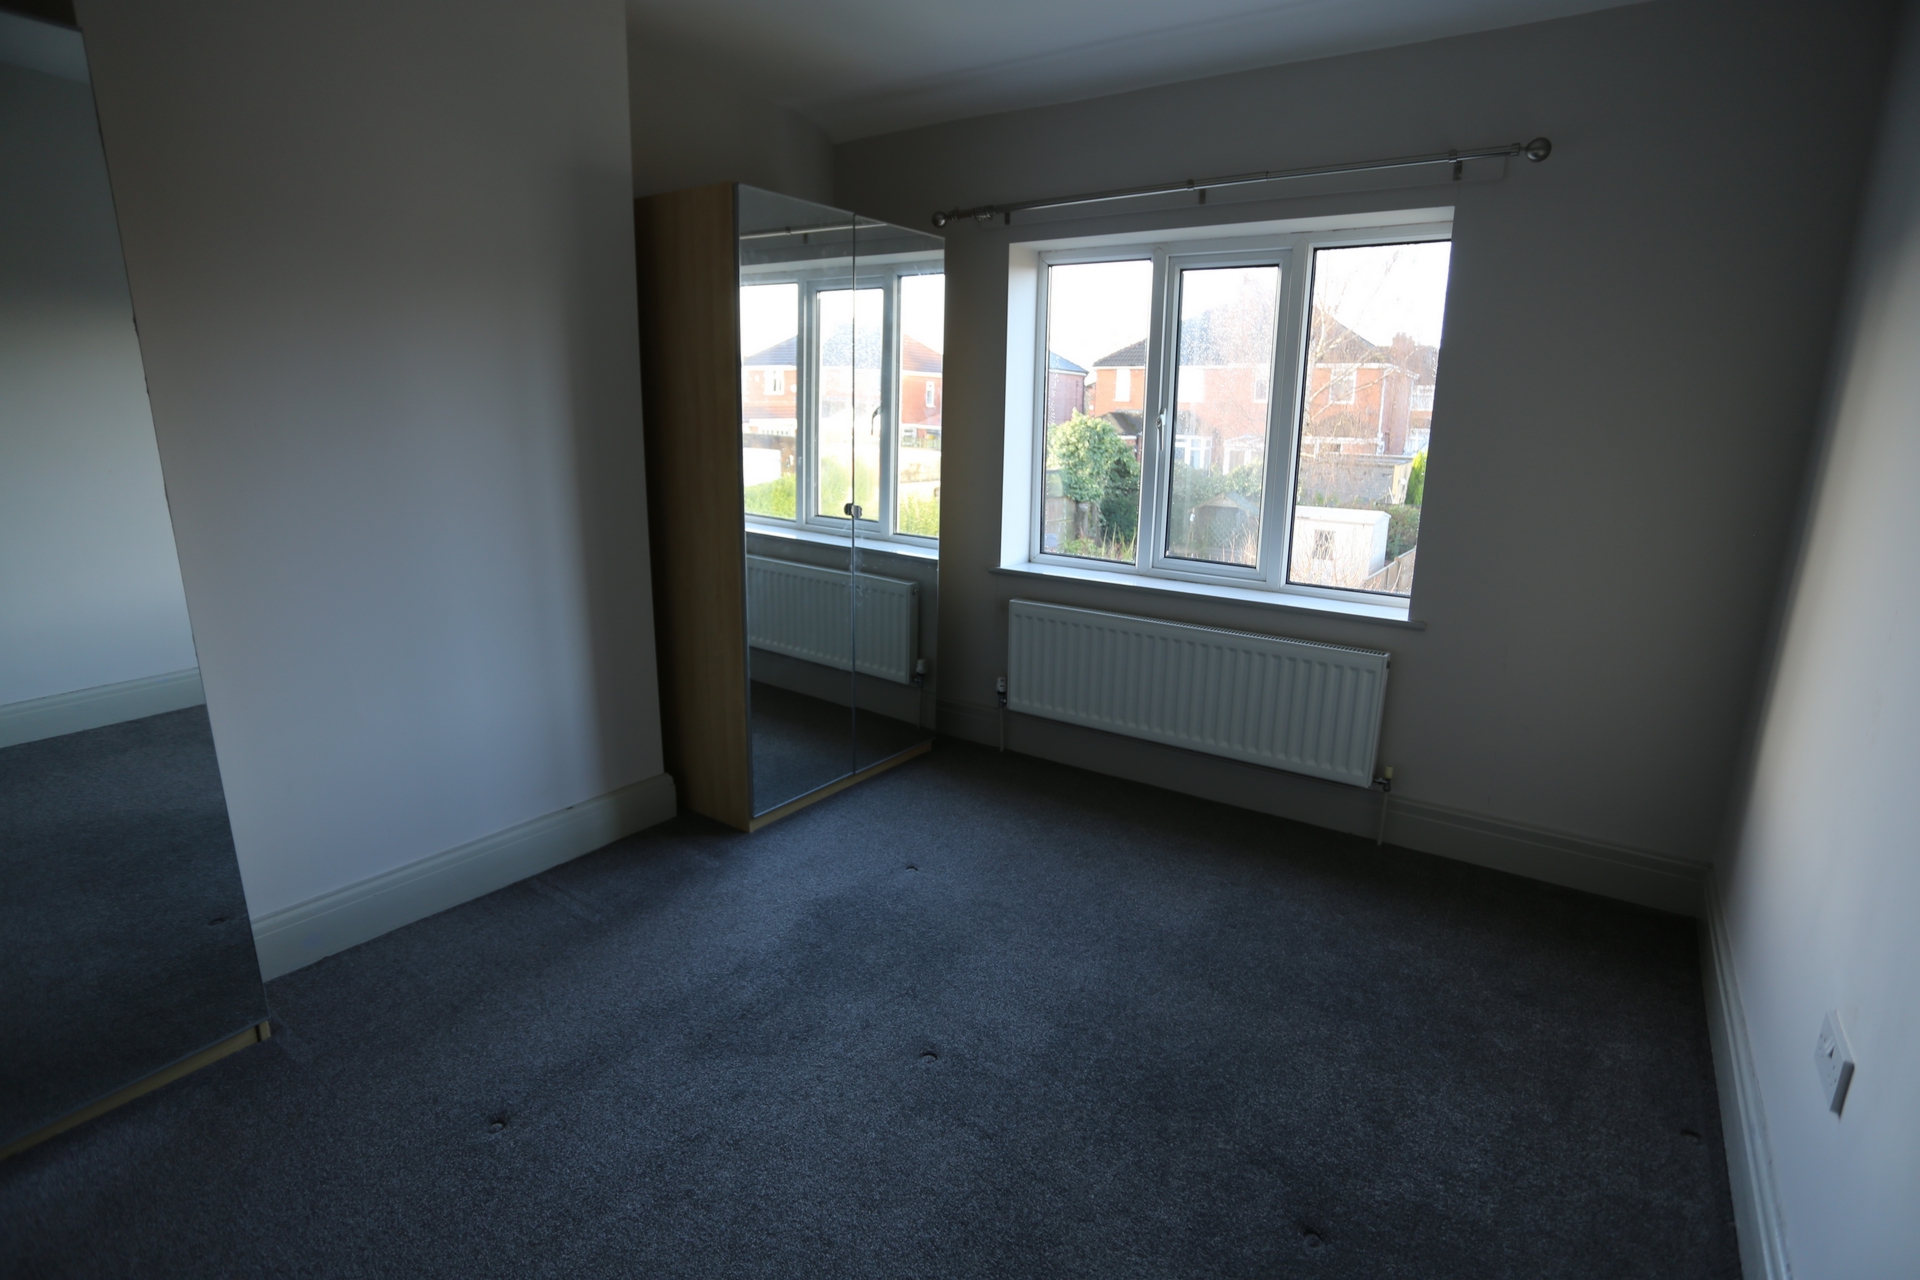 3 bedrooms semi detached, 7 Courtway Drive Sneyd Green Stoke on Trent Staffordshire